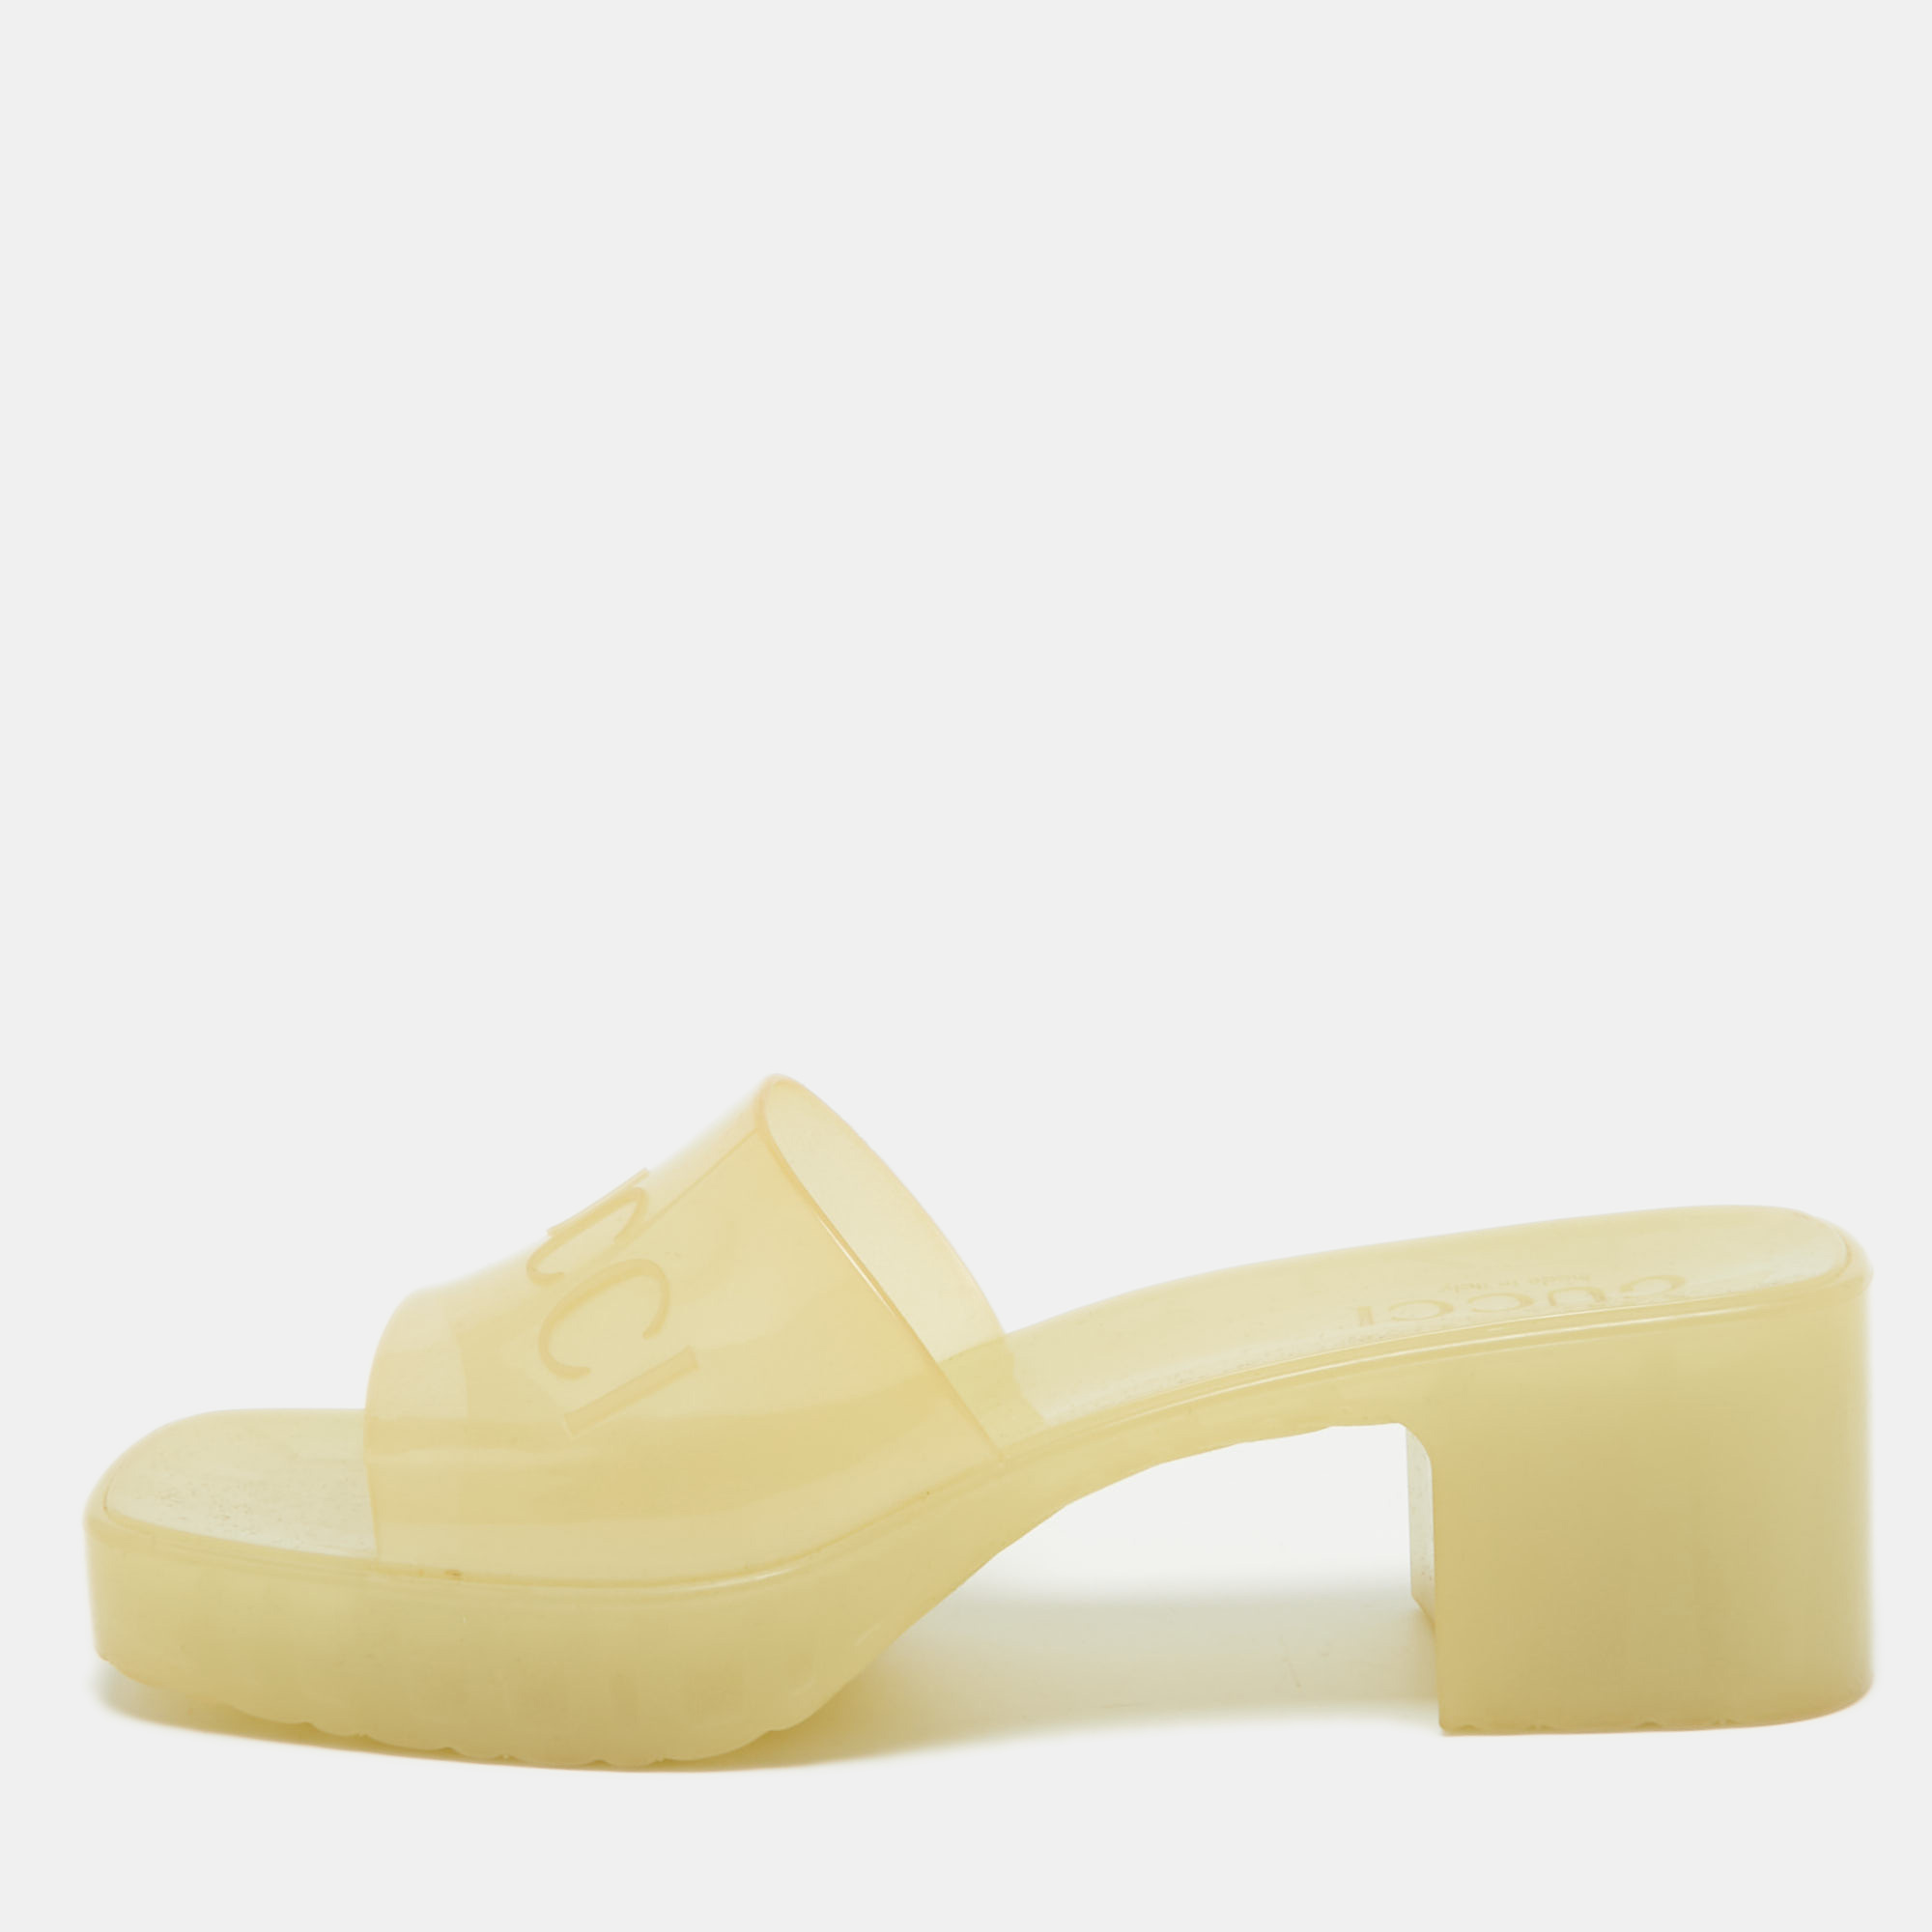 Gucci light yellow rubber logo embossed slide sandals size 37